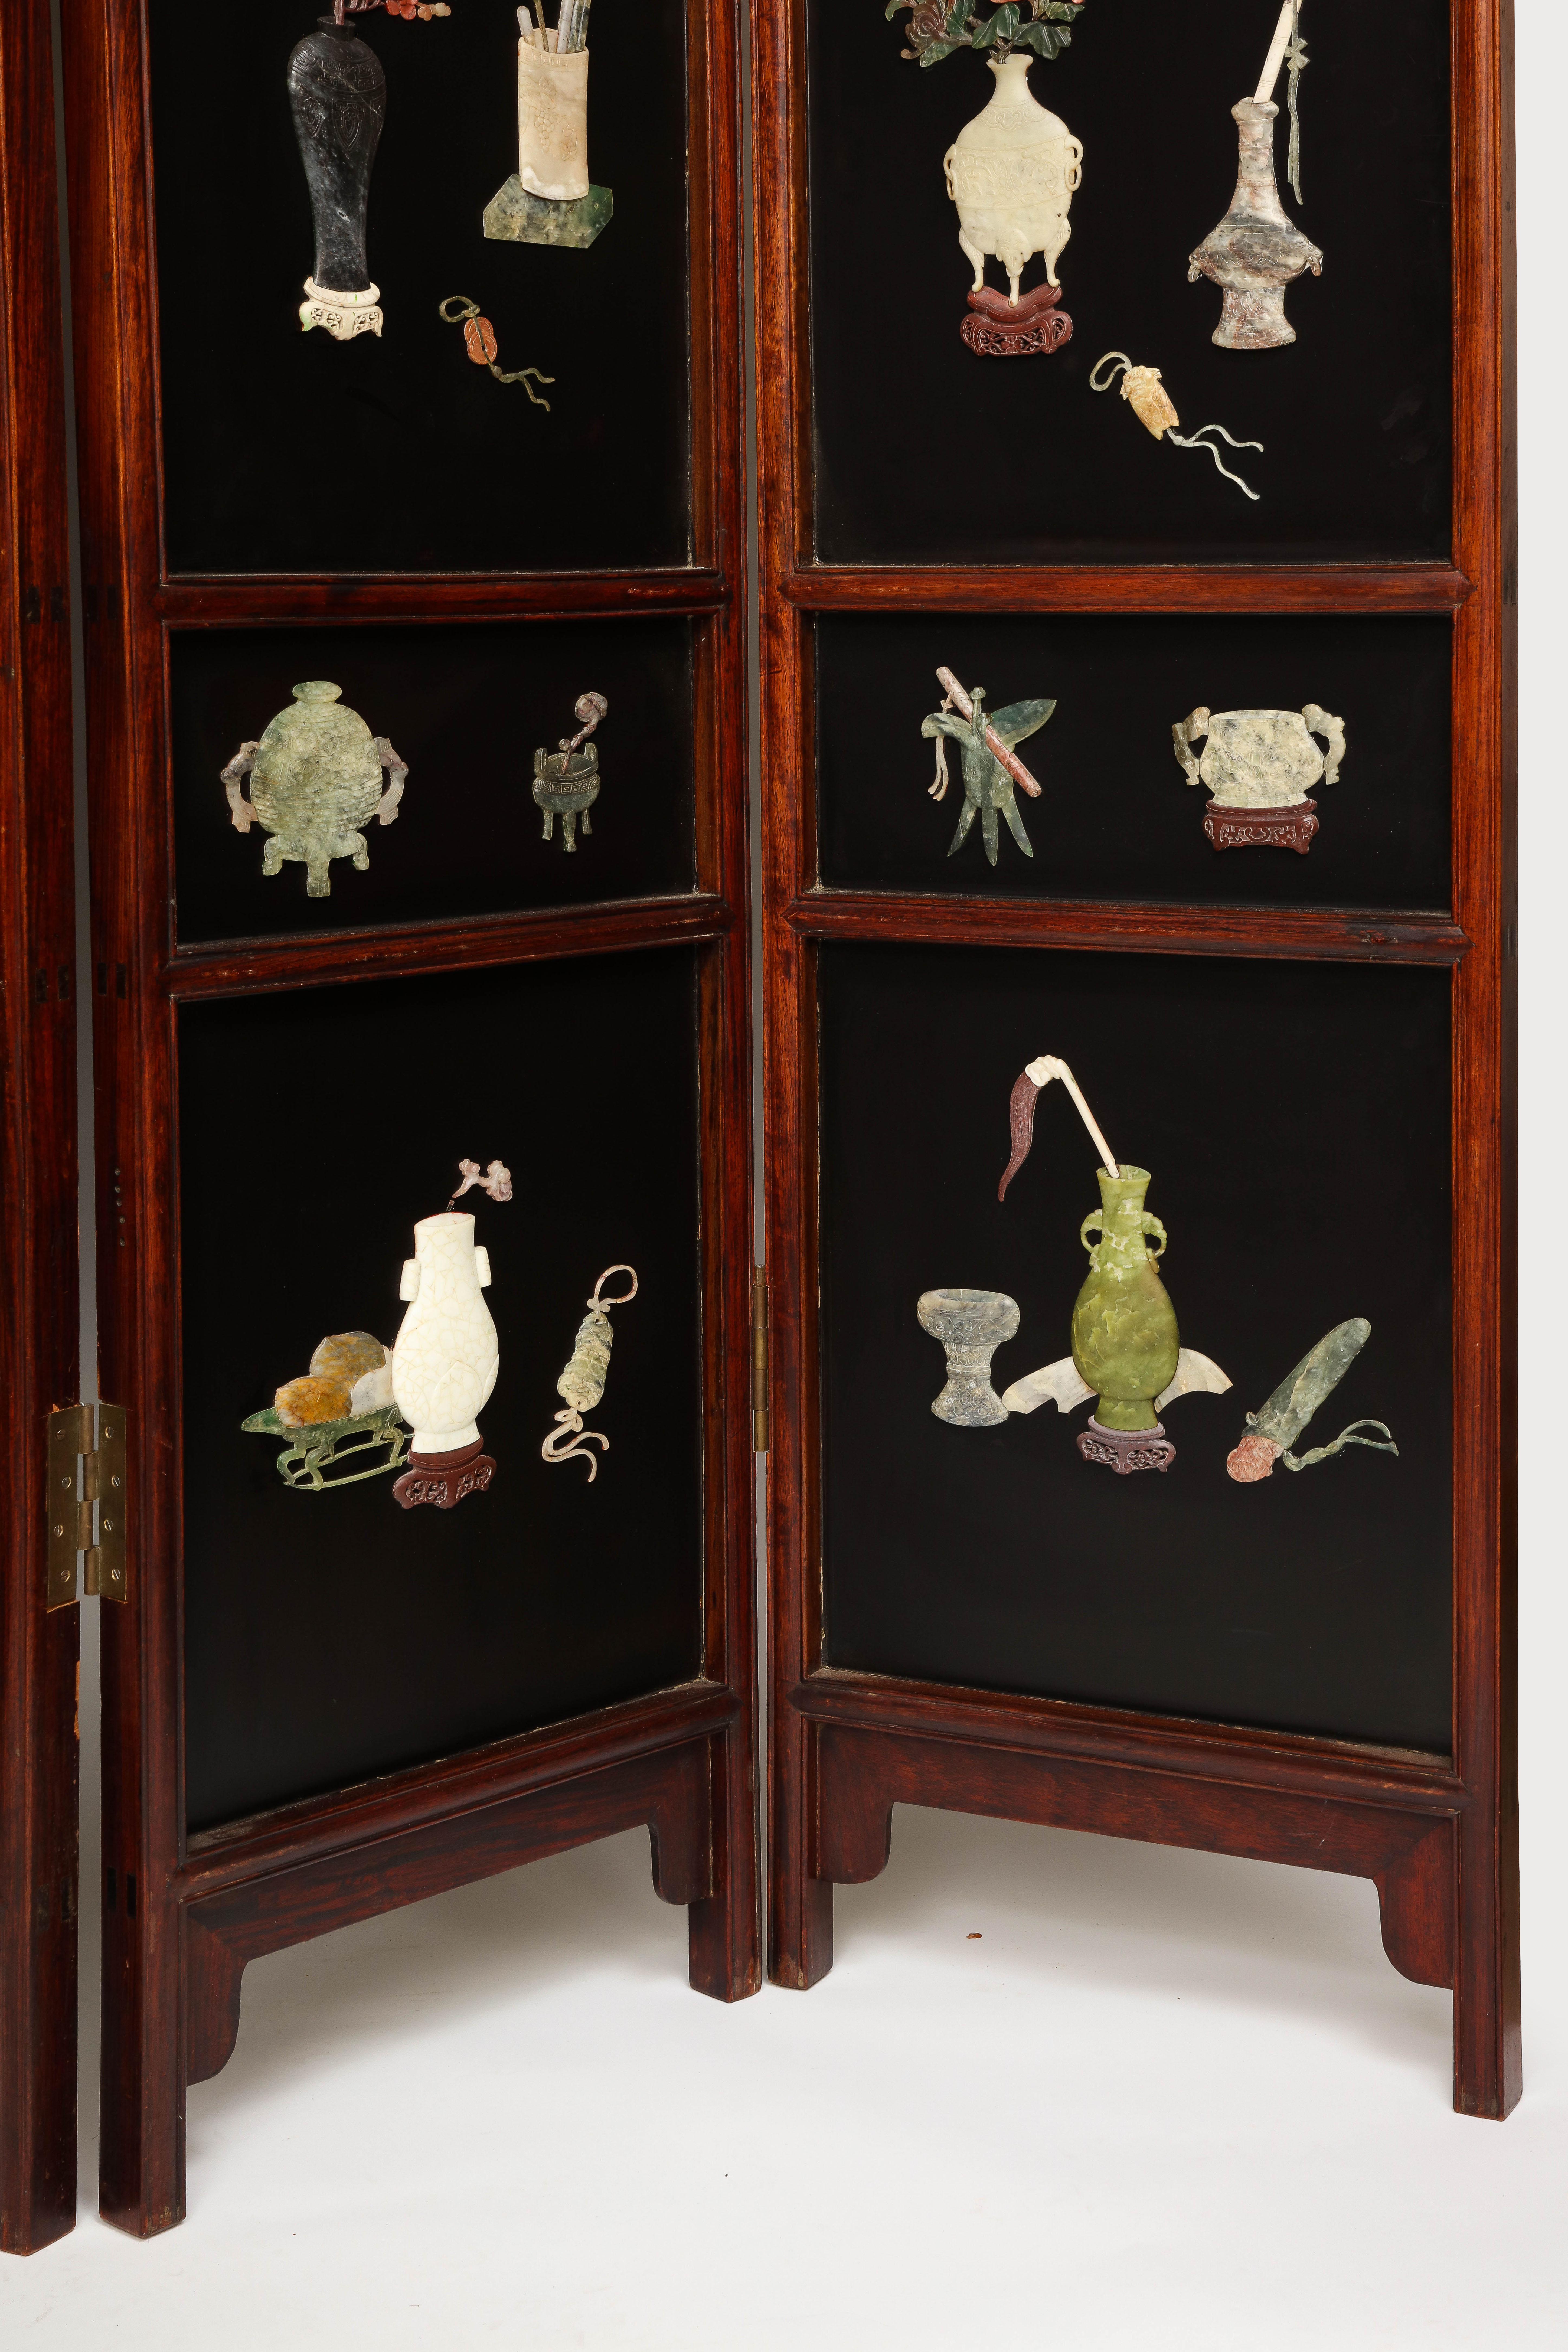 Large 20th C. Chinese 6 Panel Lacquered Hardstone and Jade Coromandel Screen For Sale 5